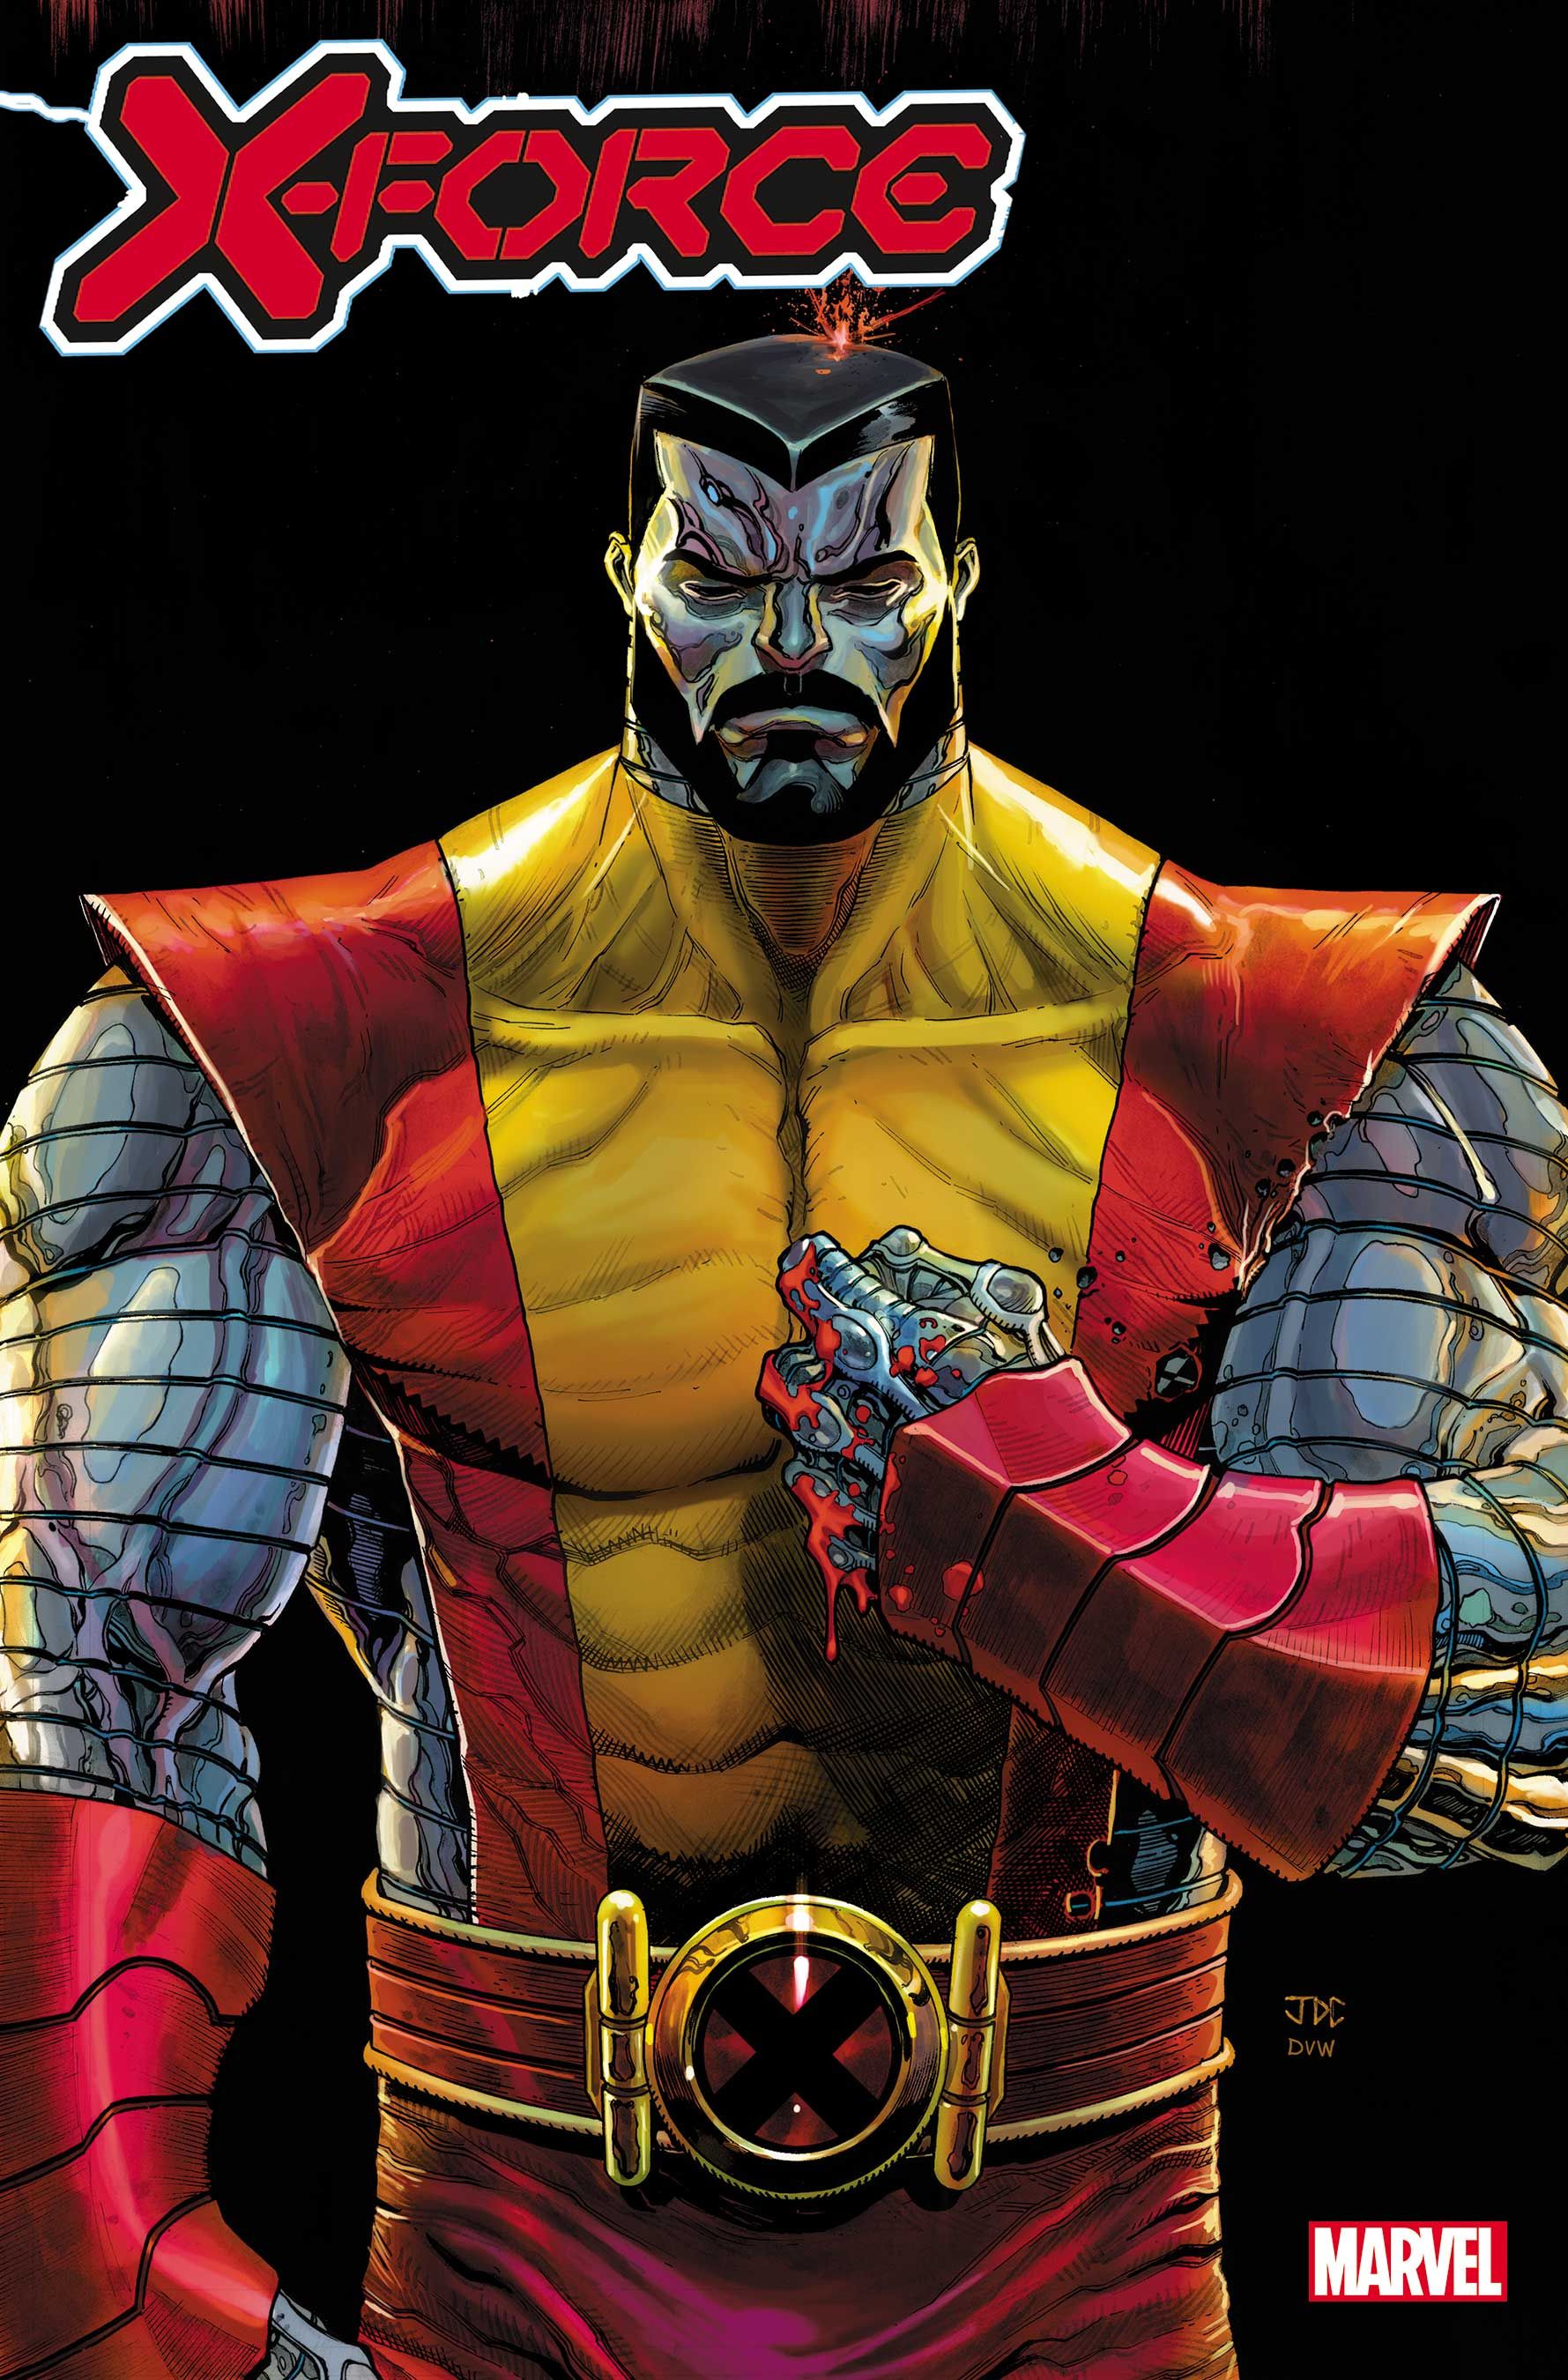 Colossus on the cover of X-Force #24